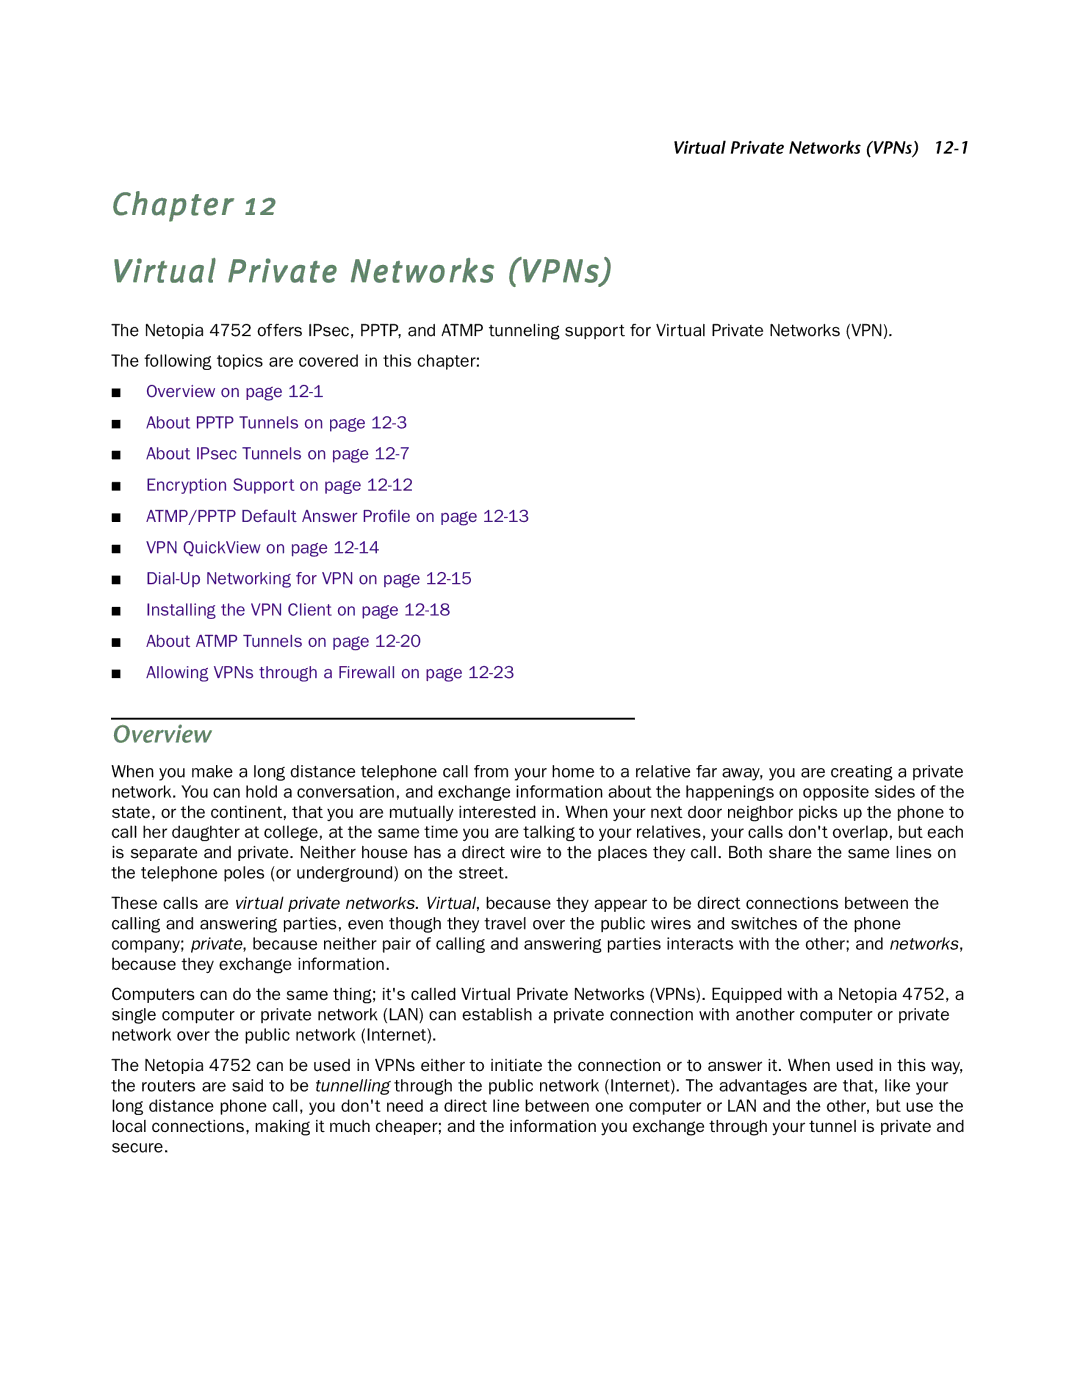 Netopia 4752 manual Chapter Virtual Private Networks VPNs, Overview 